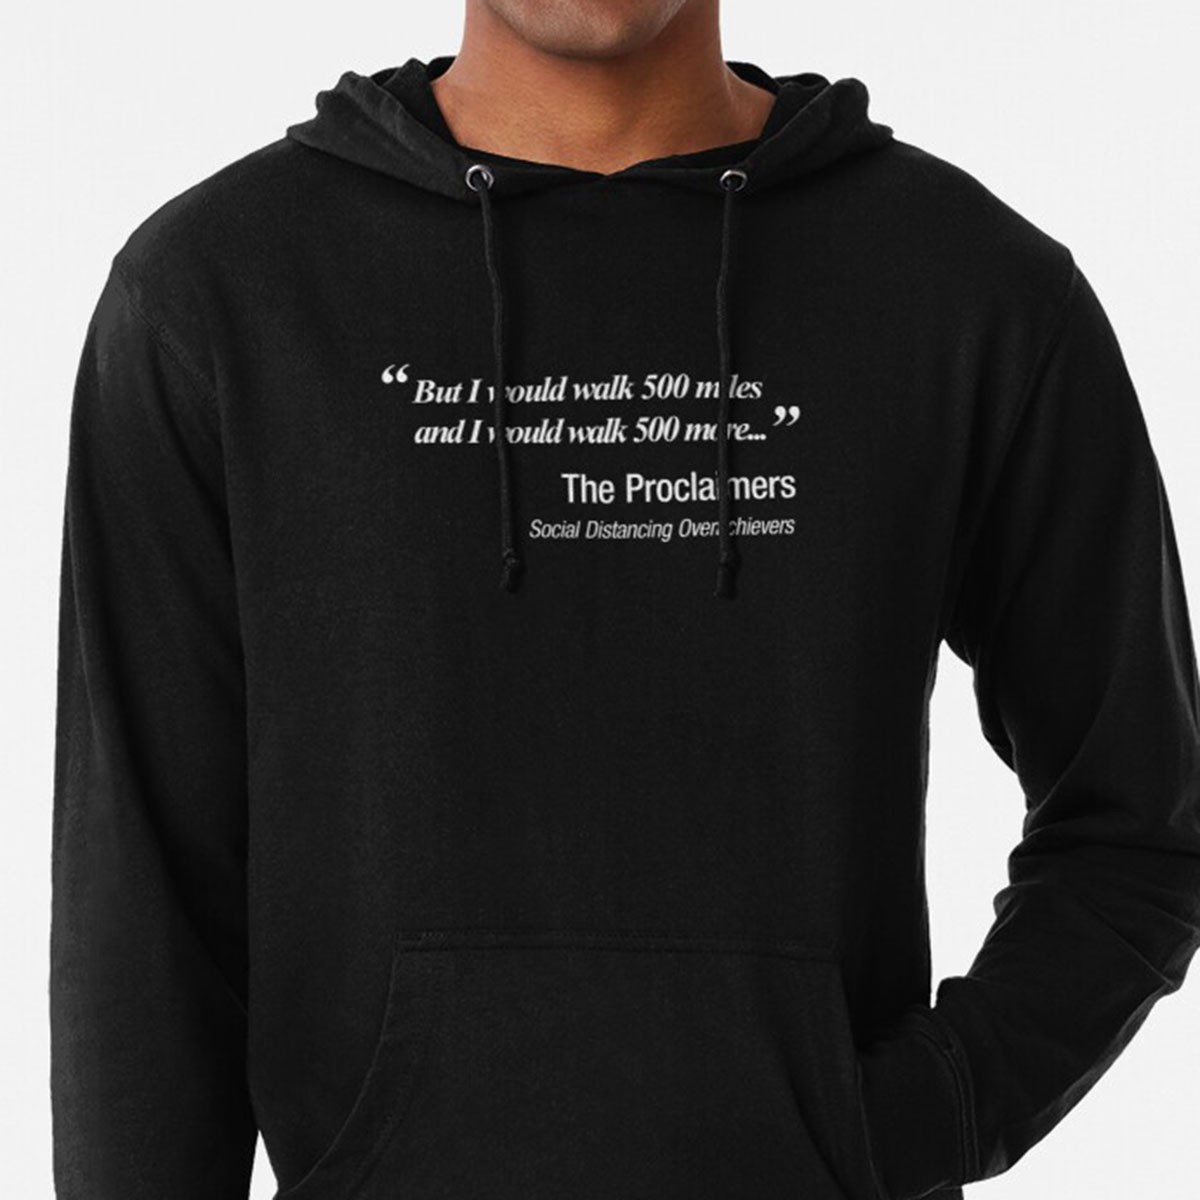 I would walk 500 miles.  Proclaimers Social Distancing Parody  Lightweight hoodie by NTK Apparel